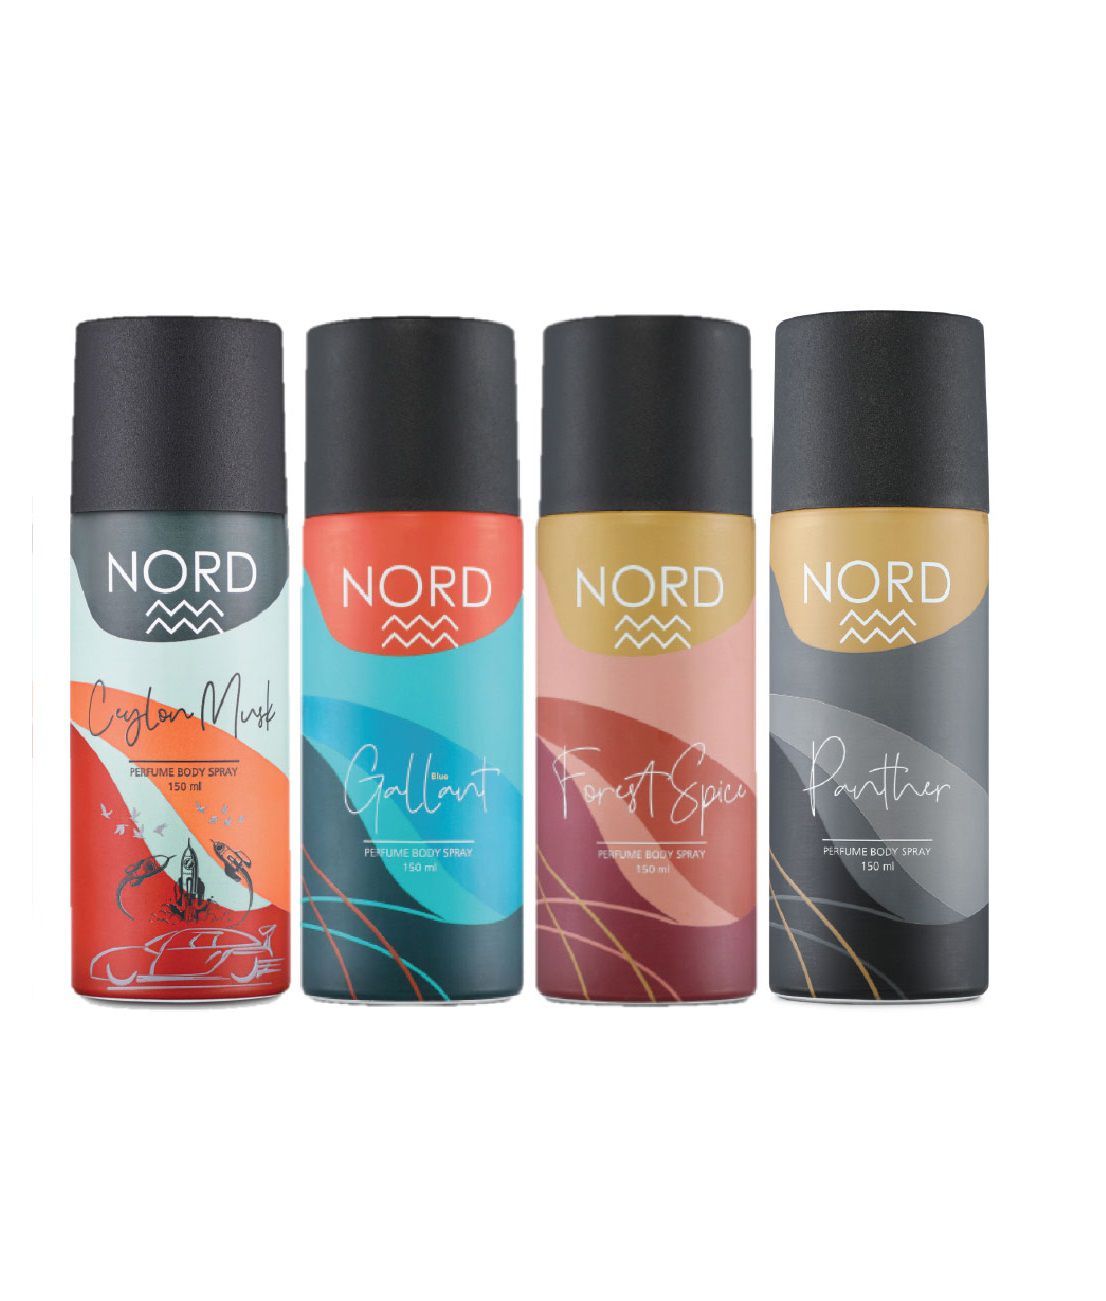     			NORD Deodorant Body Spray - Panther, Forest Spice, Gallant and Ceylon Musk 150 ml each (Pack of 4)